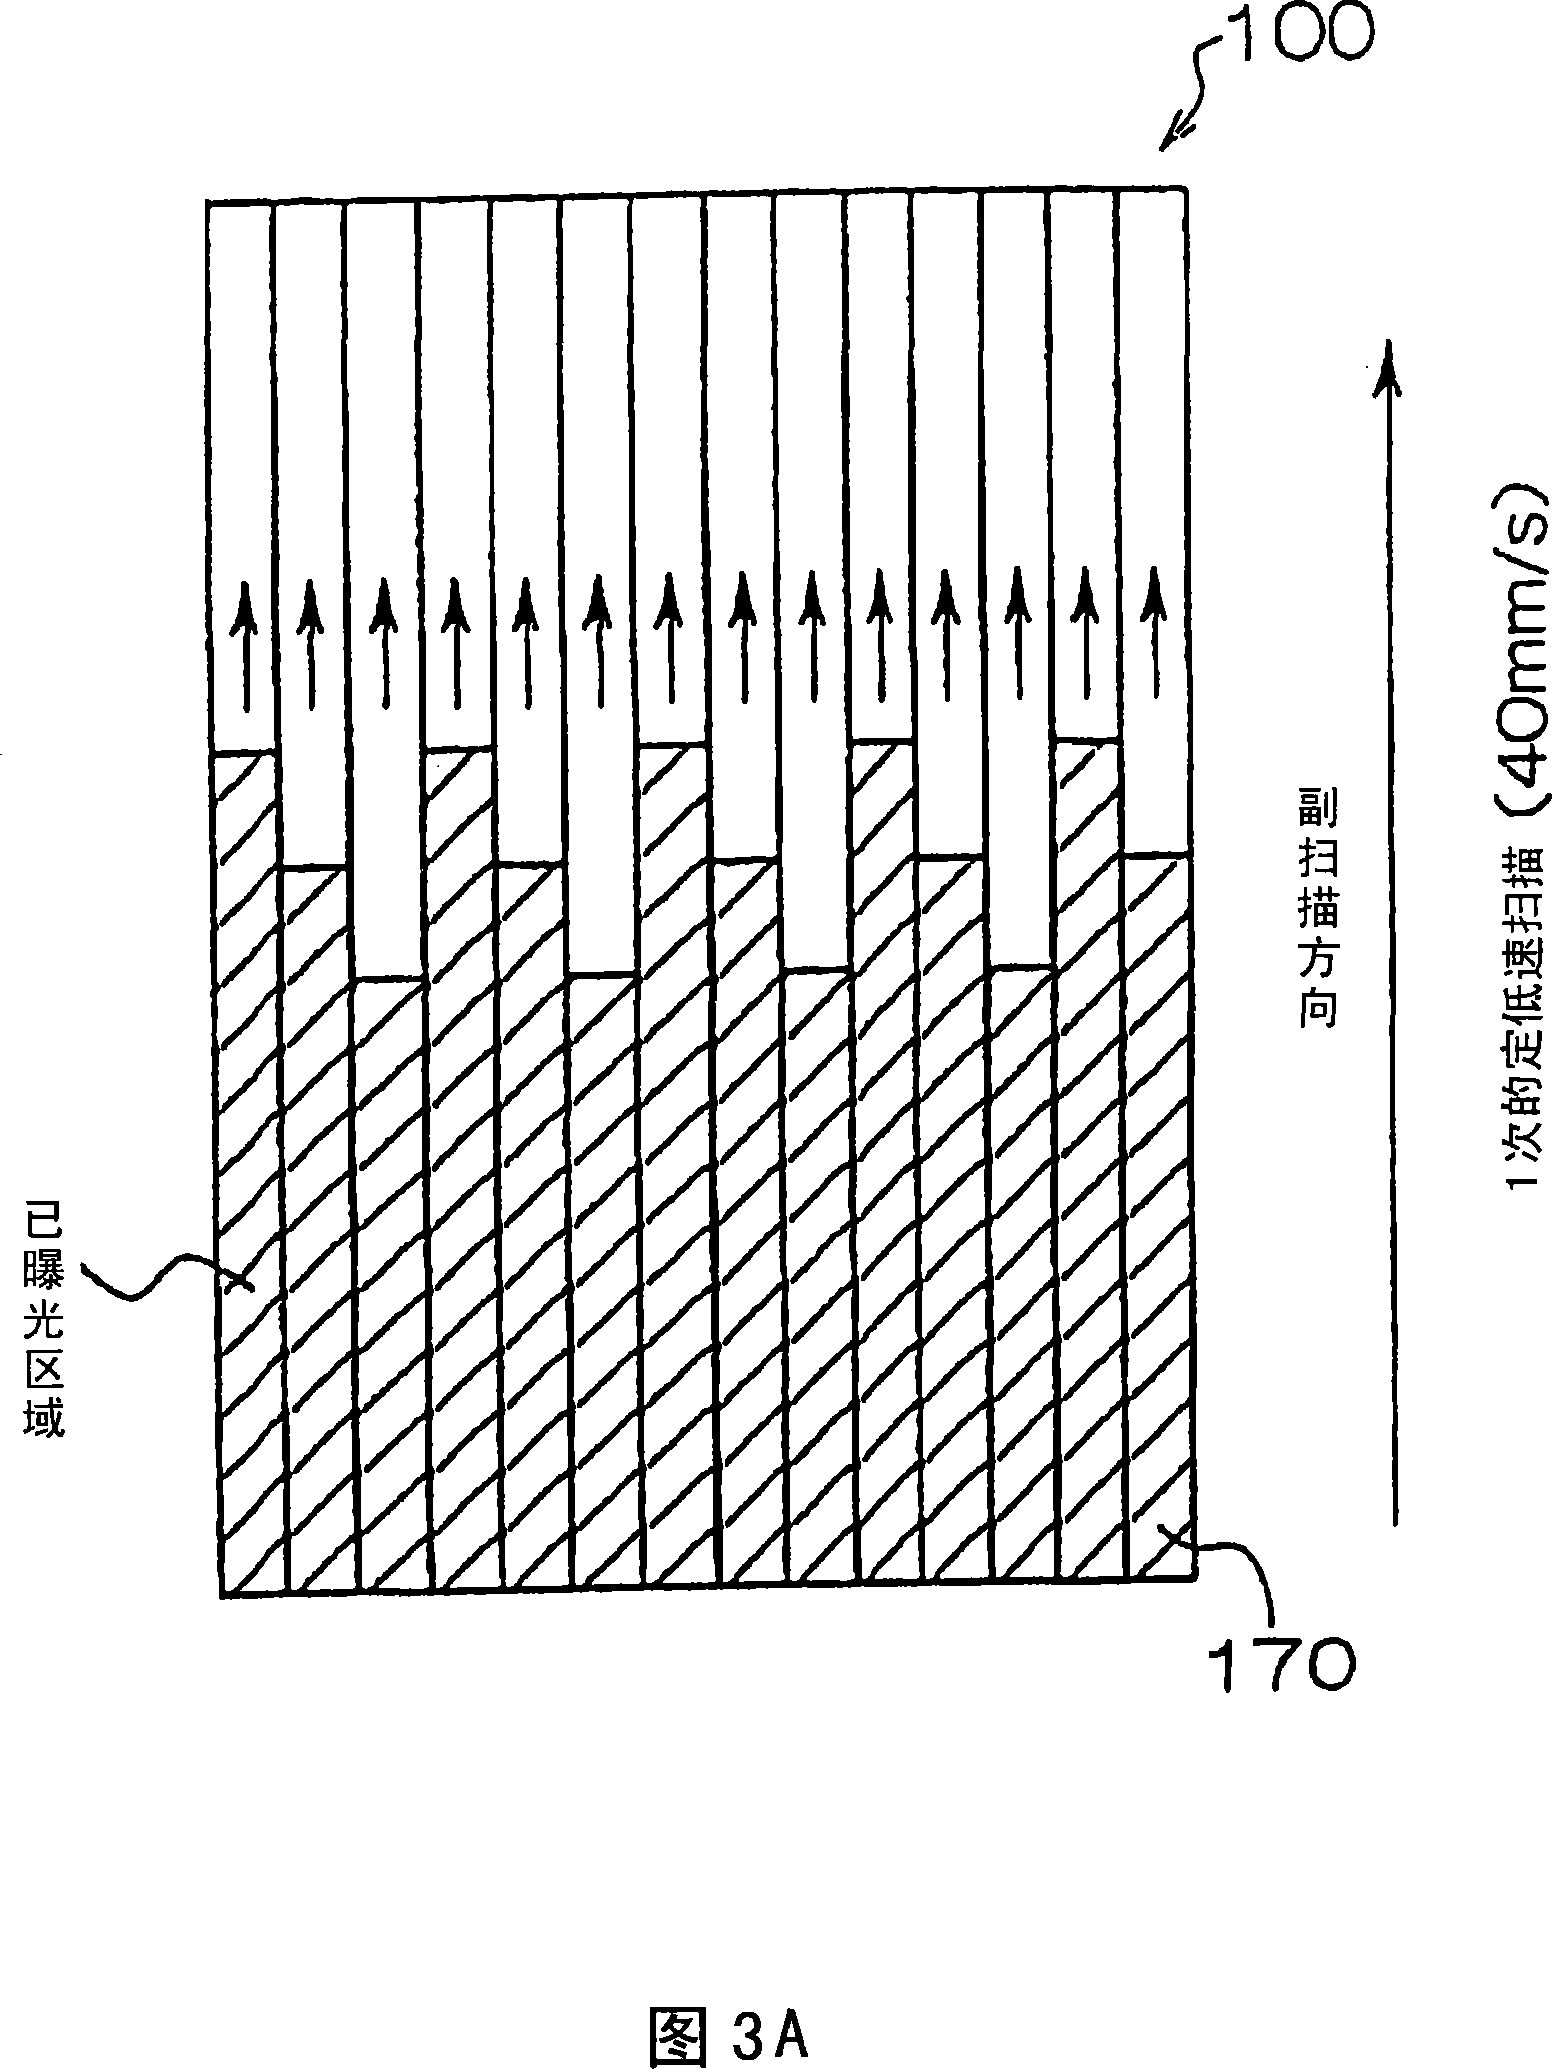 Photosensitive resin composition for liquid crystal display element, color filter using the same, process for manufacture of the color filter, and liquid crystal display element